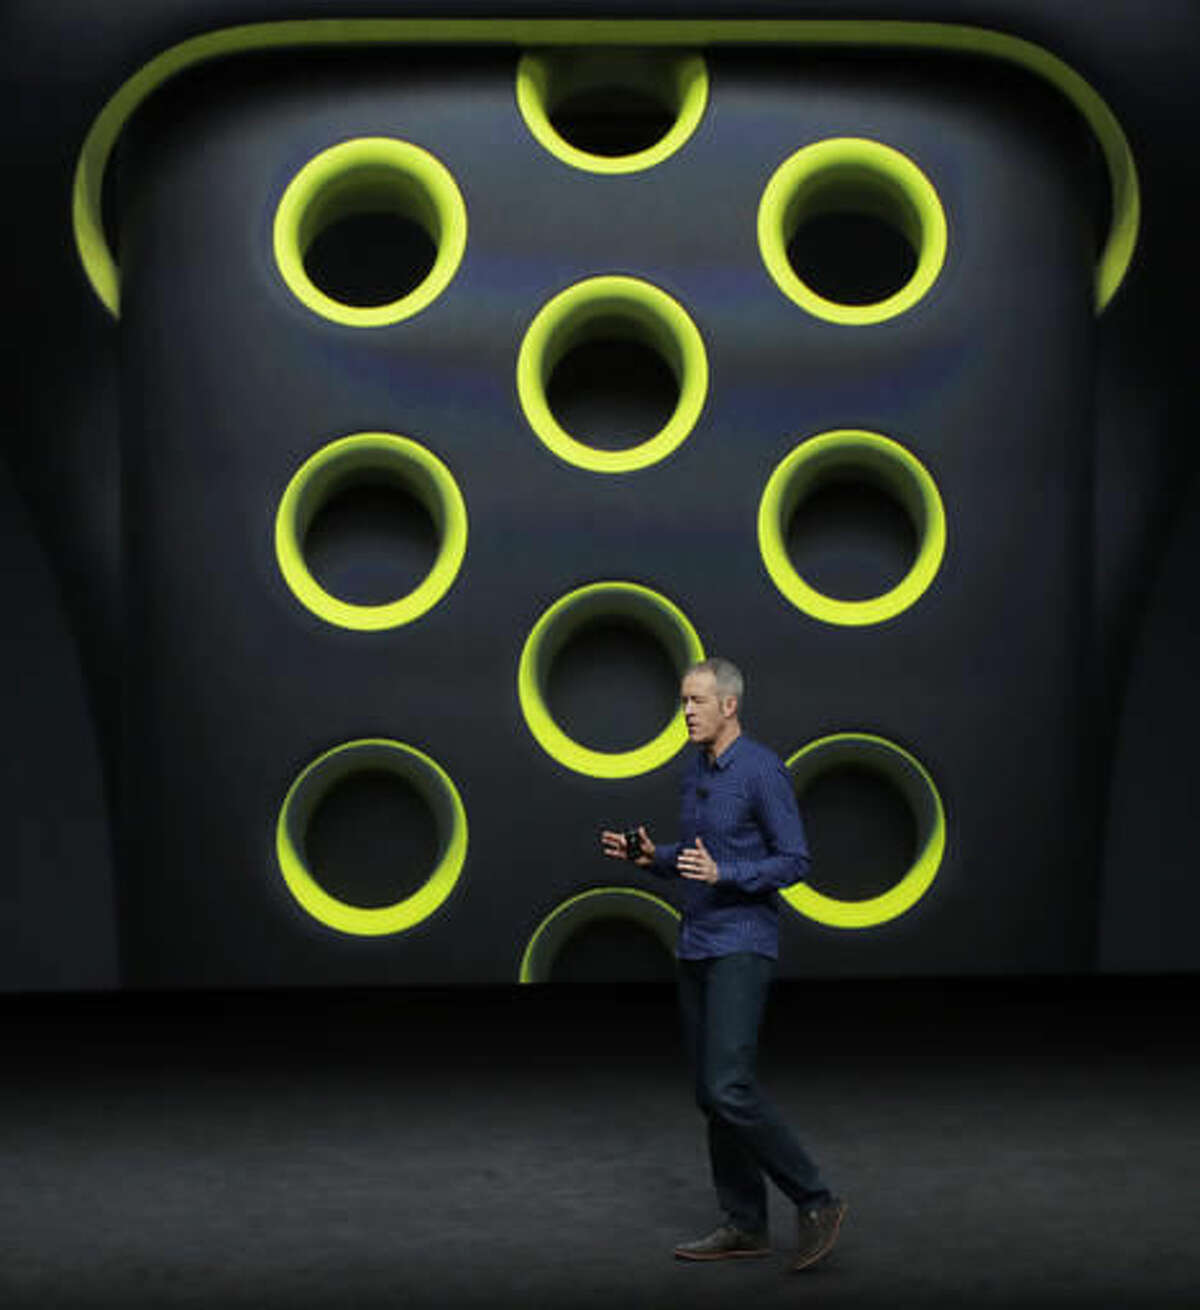 Jeff Williams, Apple's chief operating officer, speaks during an event to announce new products on Wednesday, Sept. 7, 2016, in San Francisco. (AP Photo/Marcio Jose Sanchez)